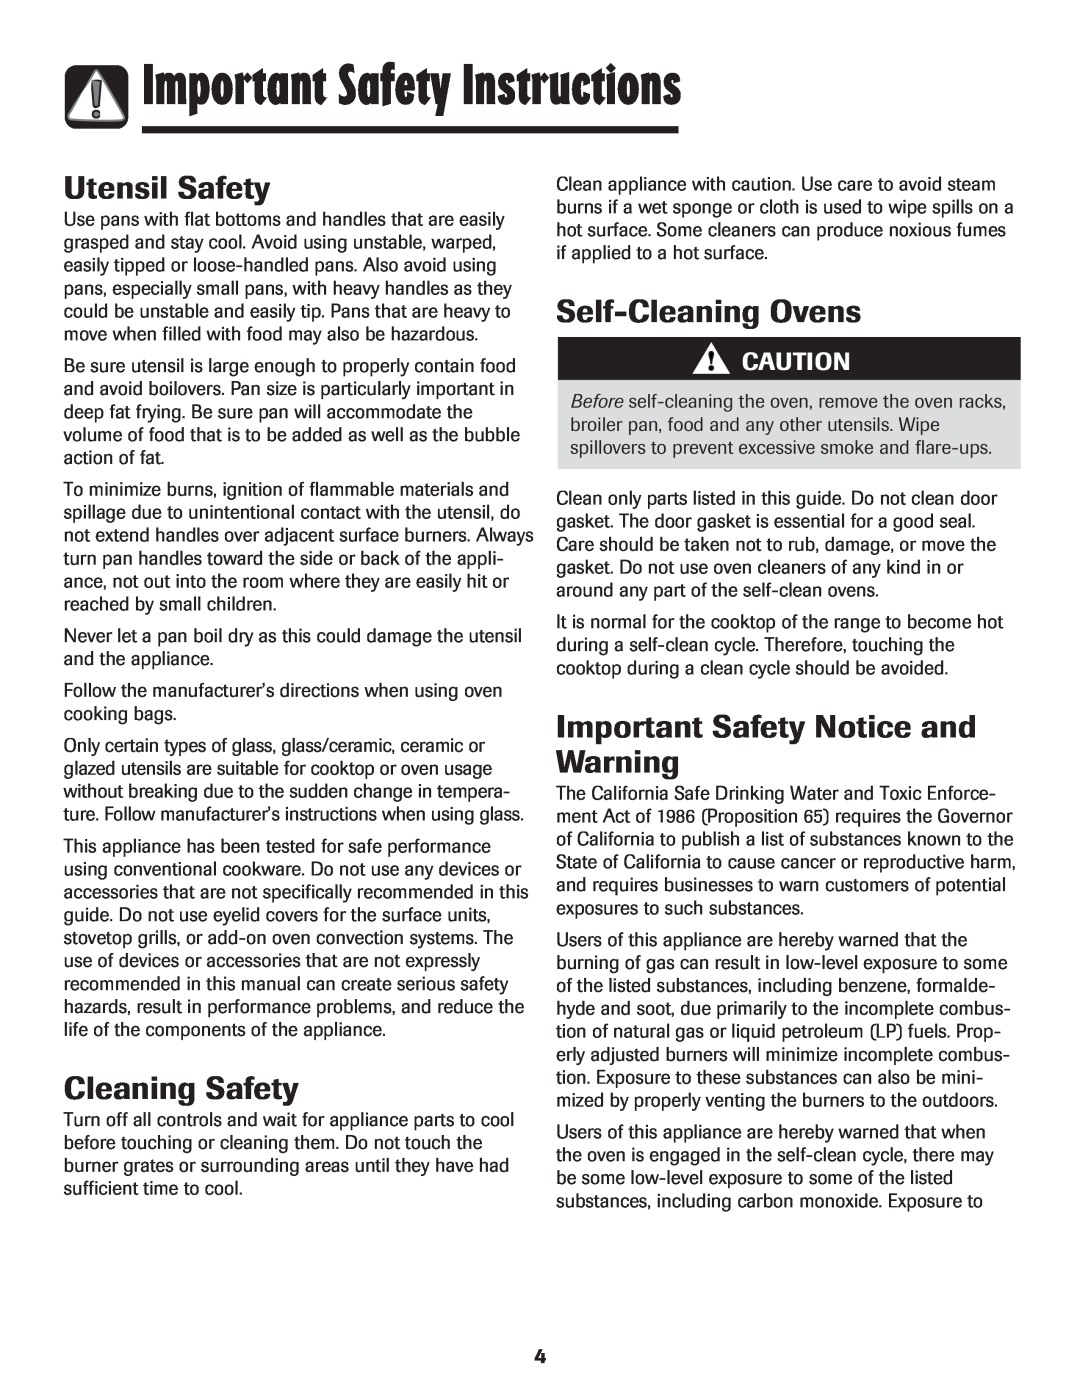 Maytag 850 Utensil Safety, Cleaning Safety, Self-Cleaning Ovens, Important Safety Notice and Warning 